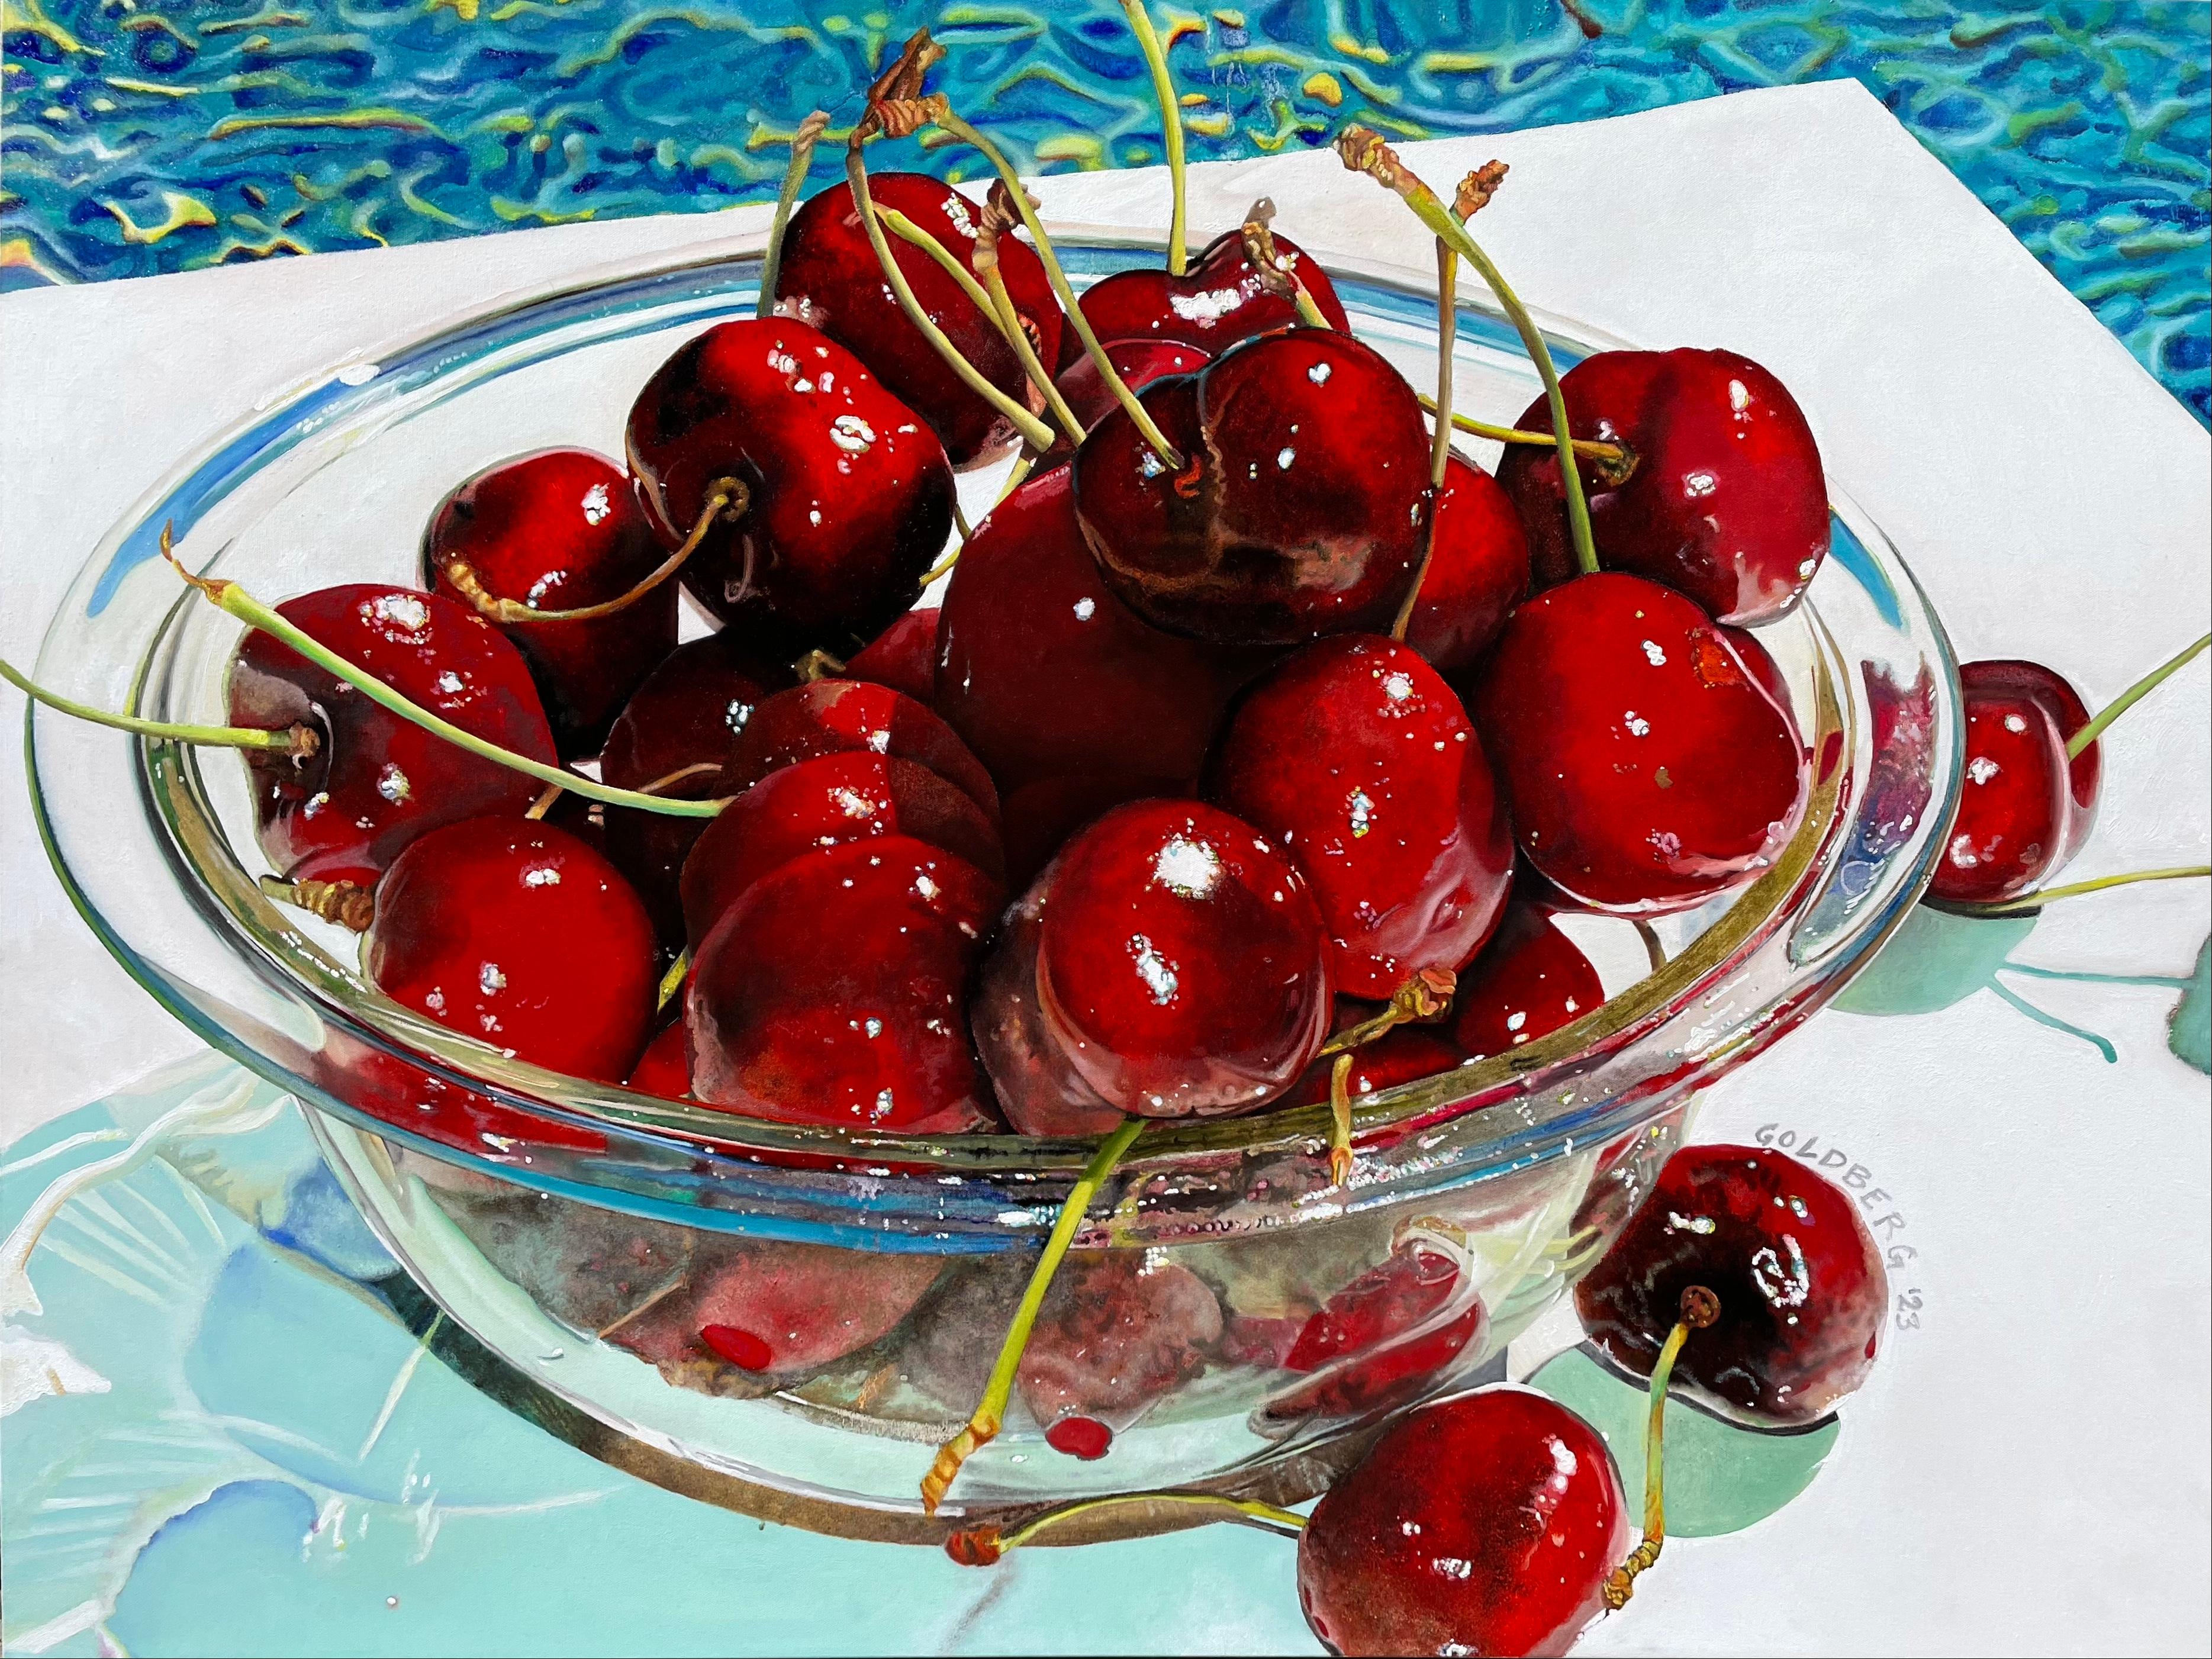 Cherries in Glass Bowl -original realism oil painting for sale- contemporary art